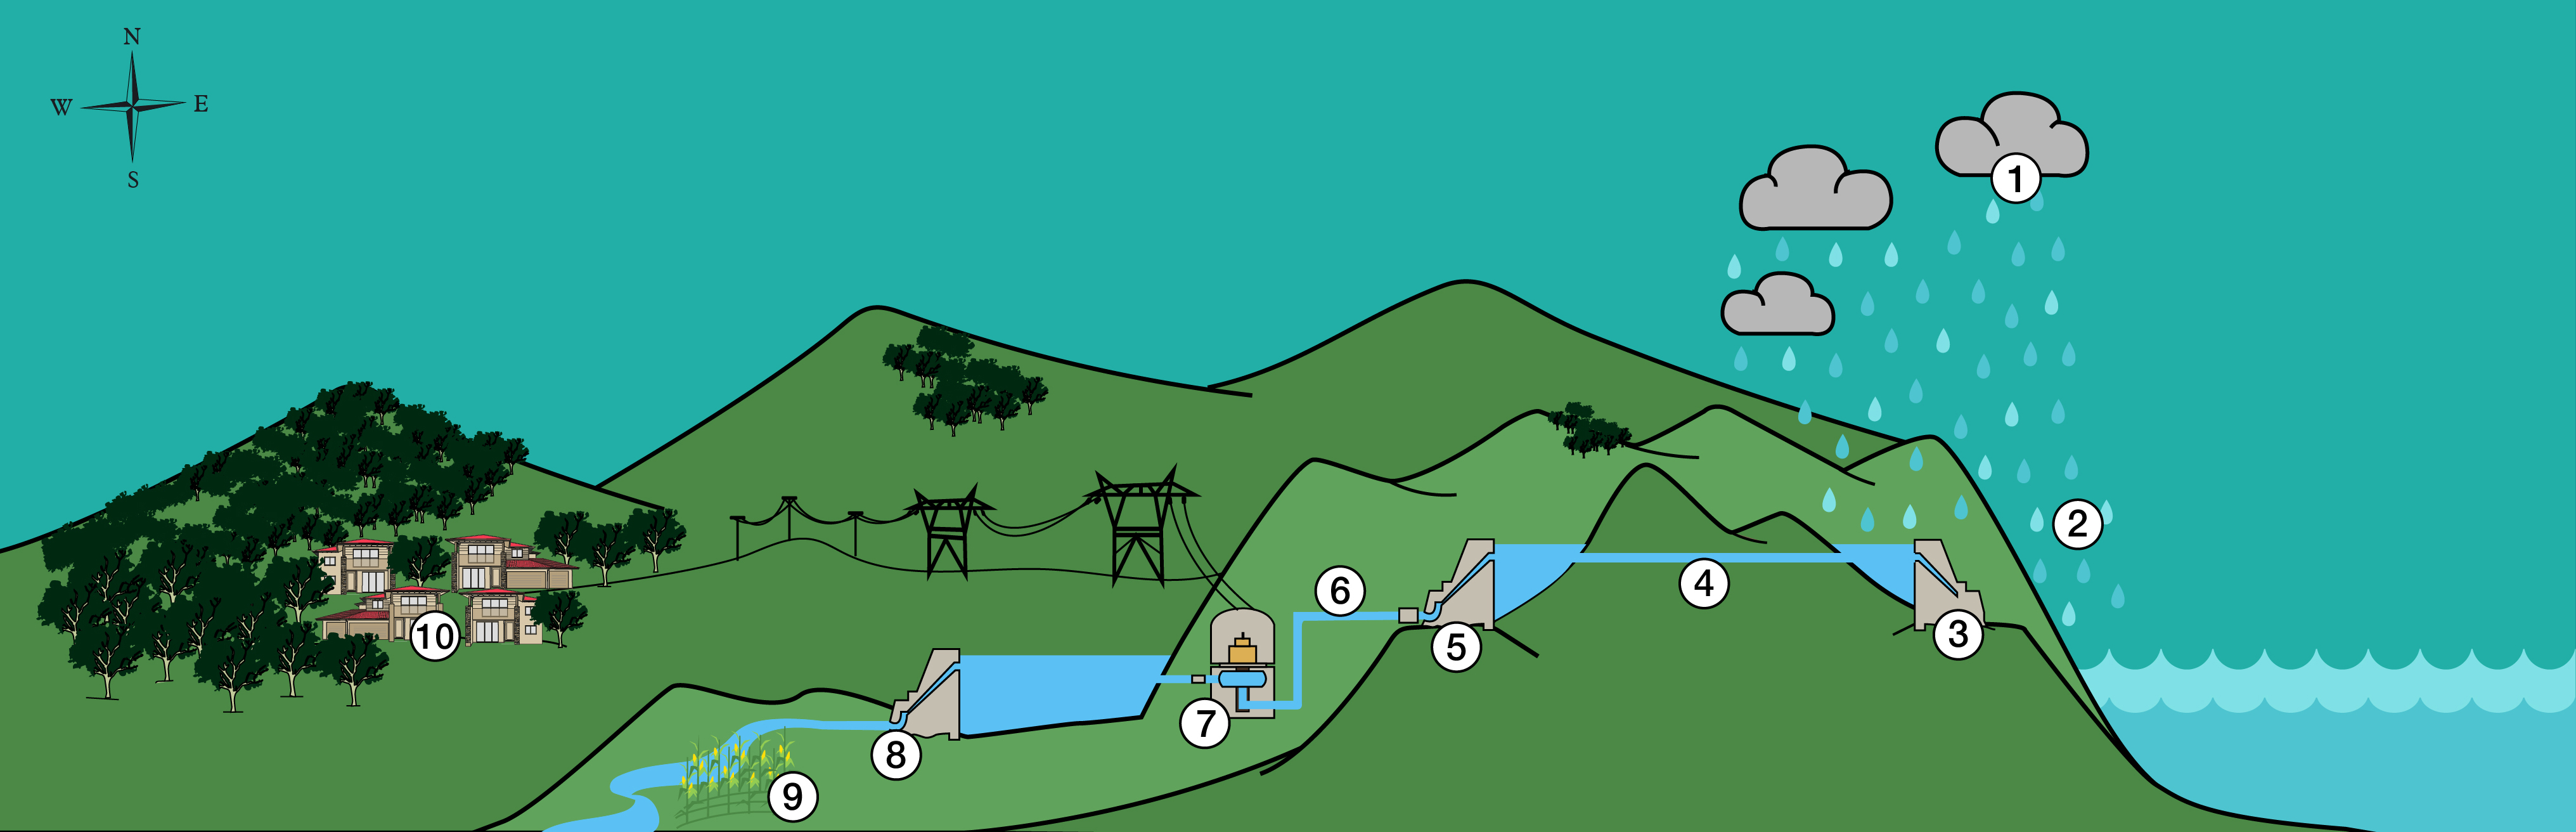 <p>Diagram showing how the Snowy Mountains Hydro-Electric Scheme captures water to generate electricity</p>
